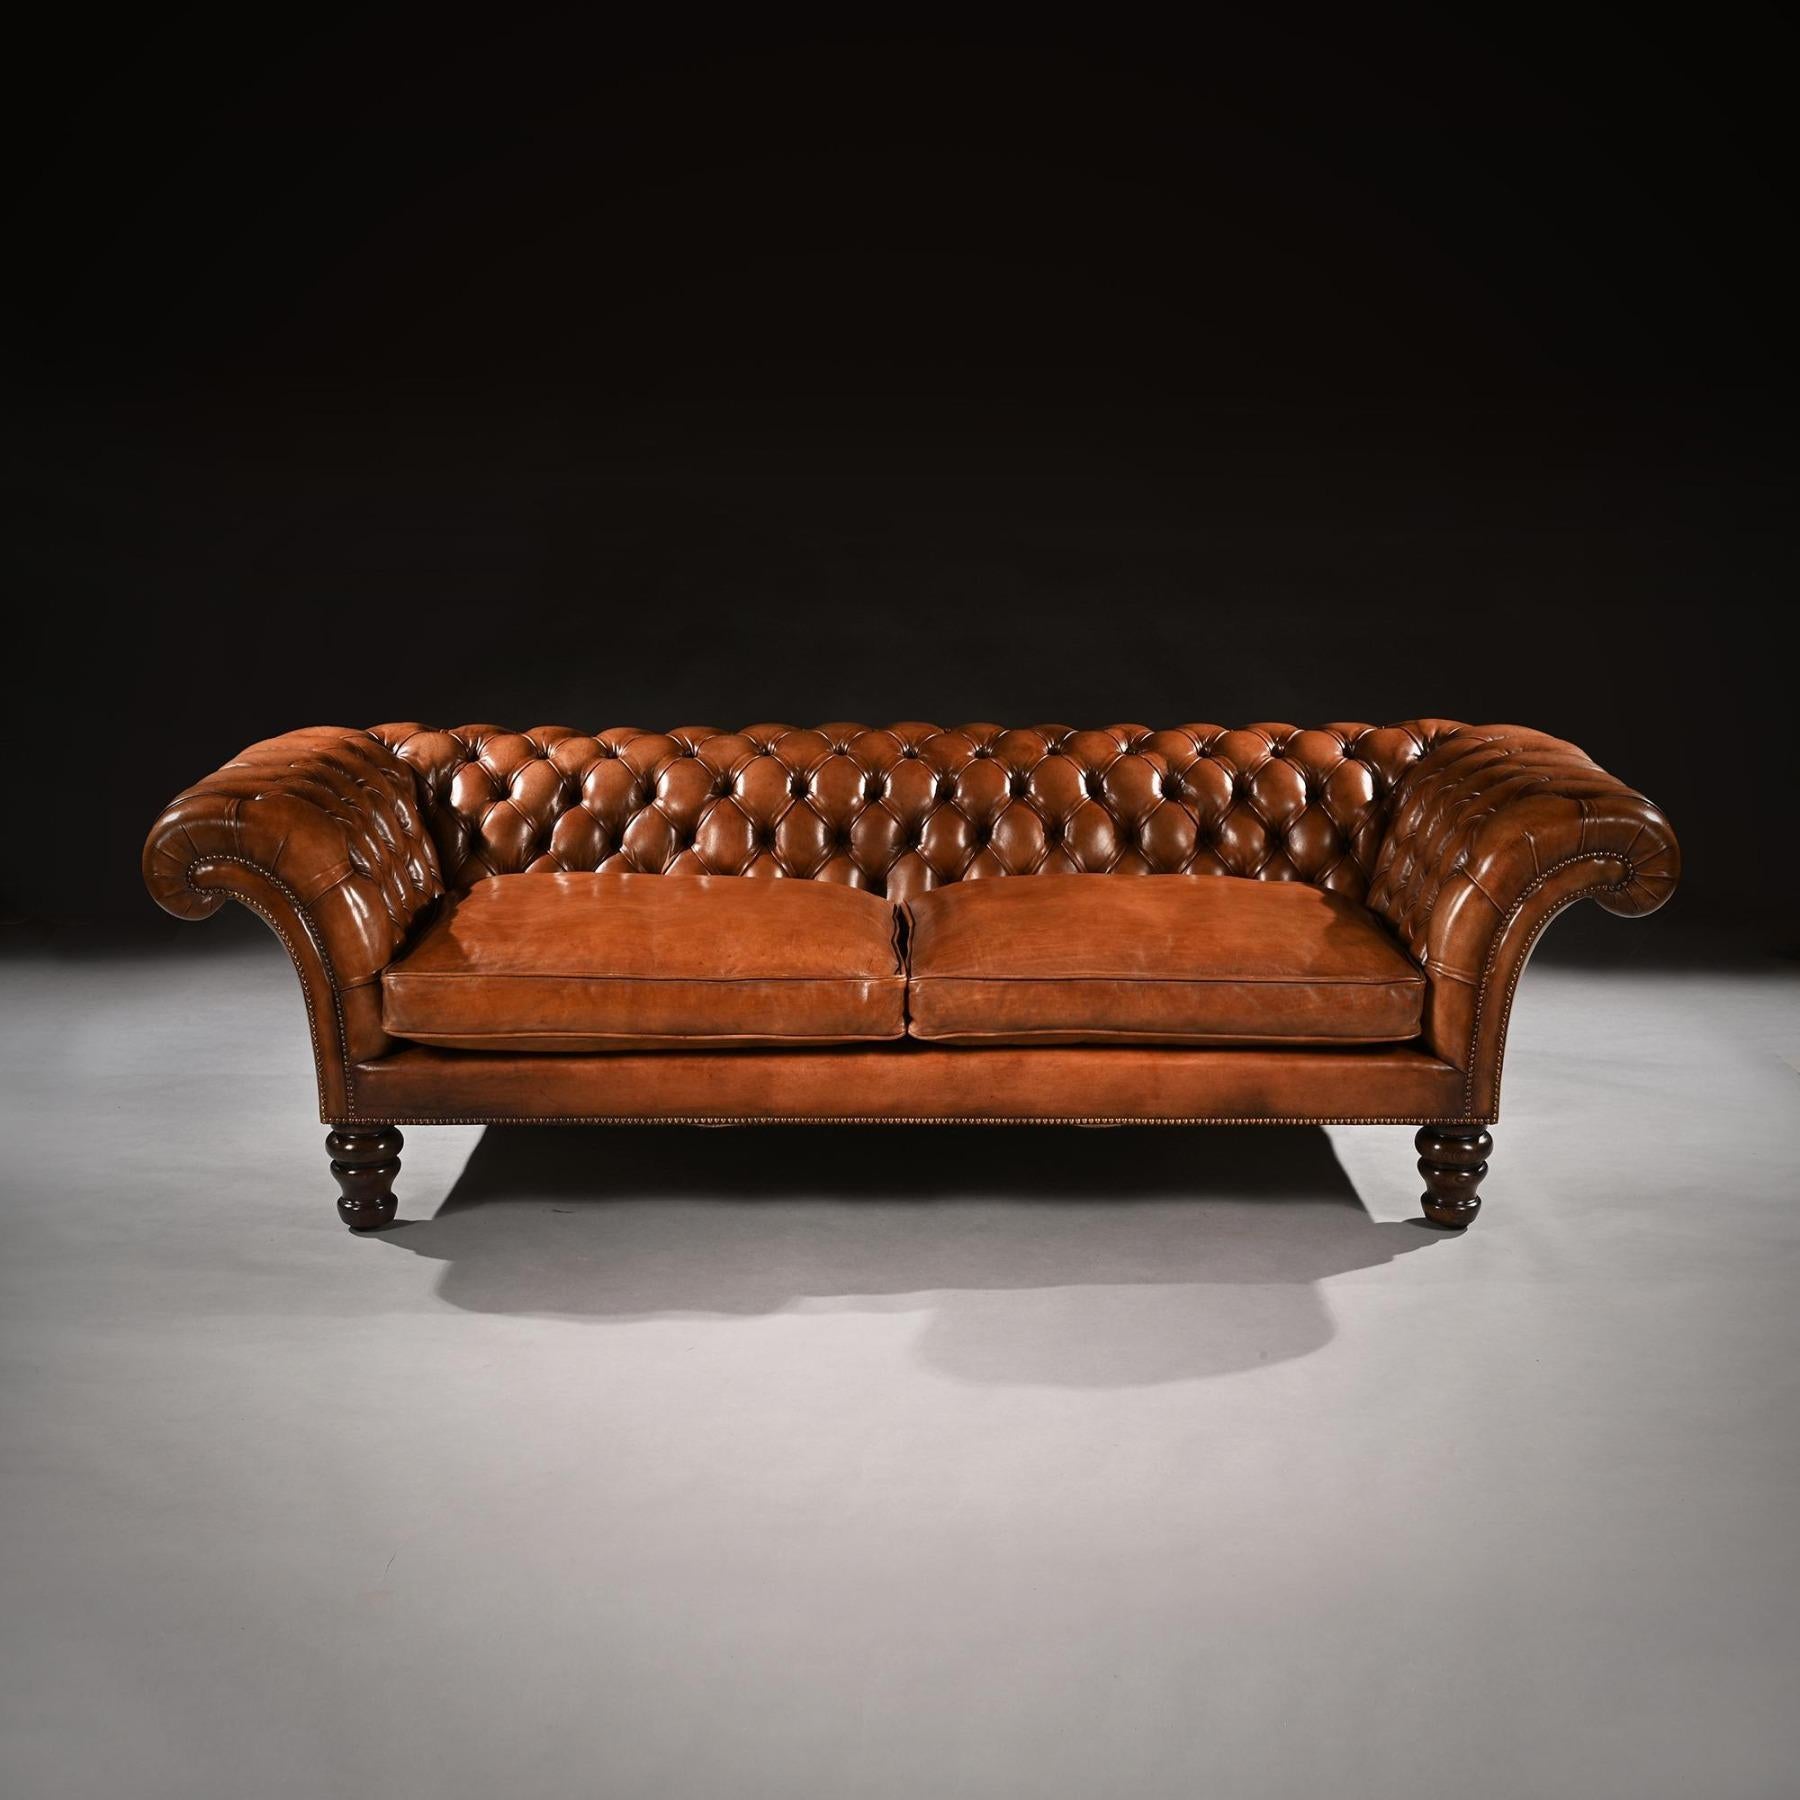 British 19th Century Victorian Leather Upholstered Chesterfield Sofa